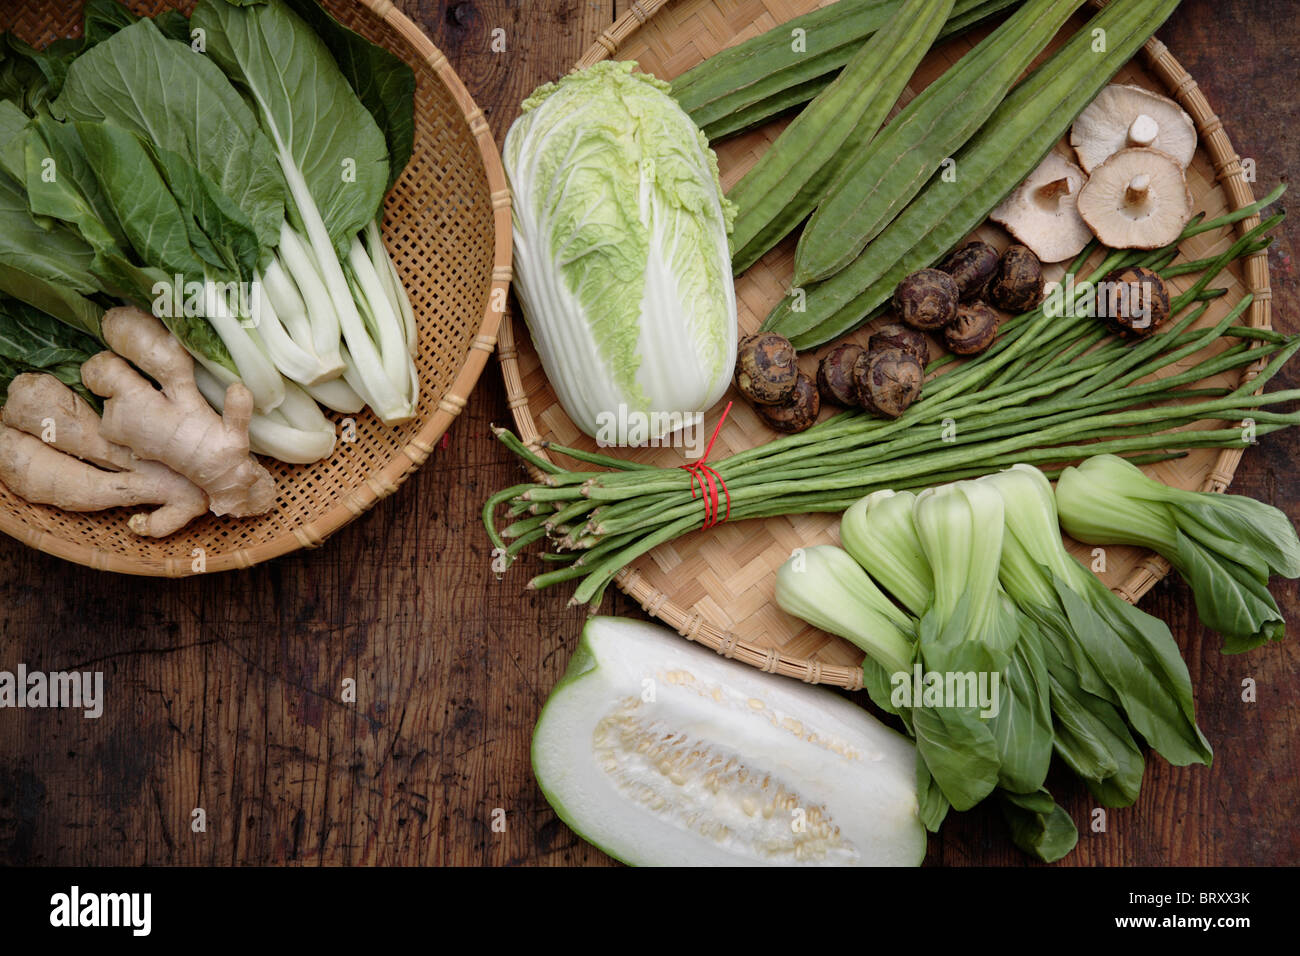 Variety of Asian vegetables Stock Photo